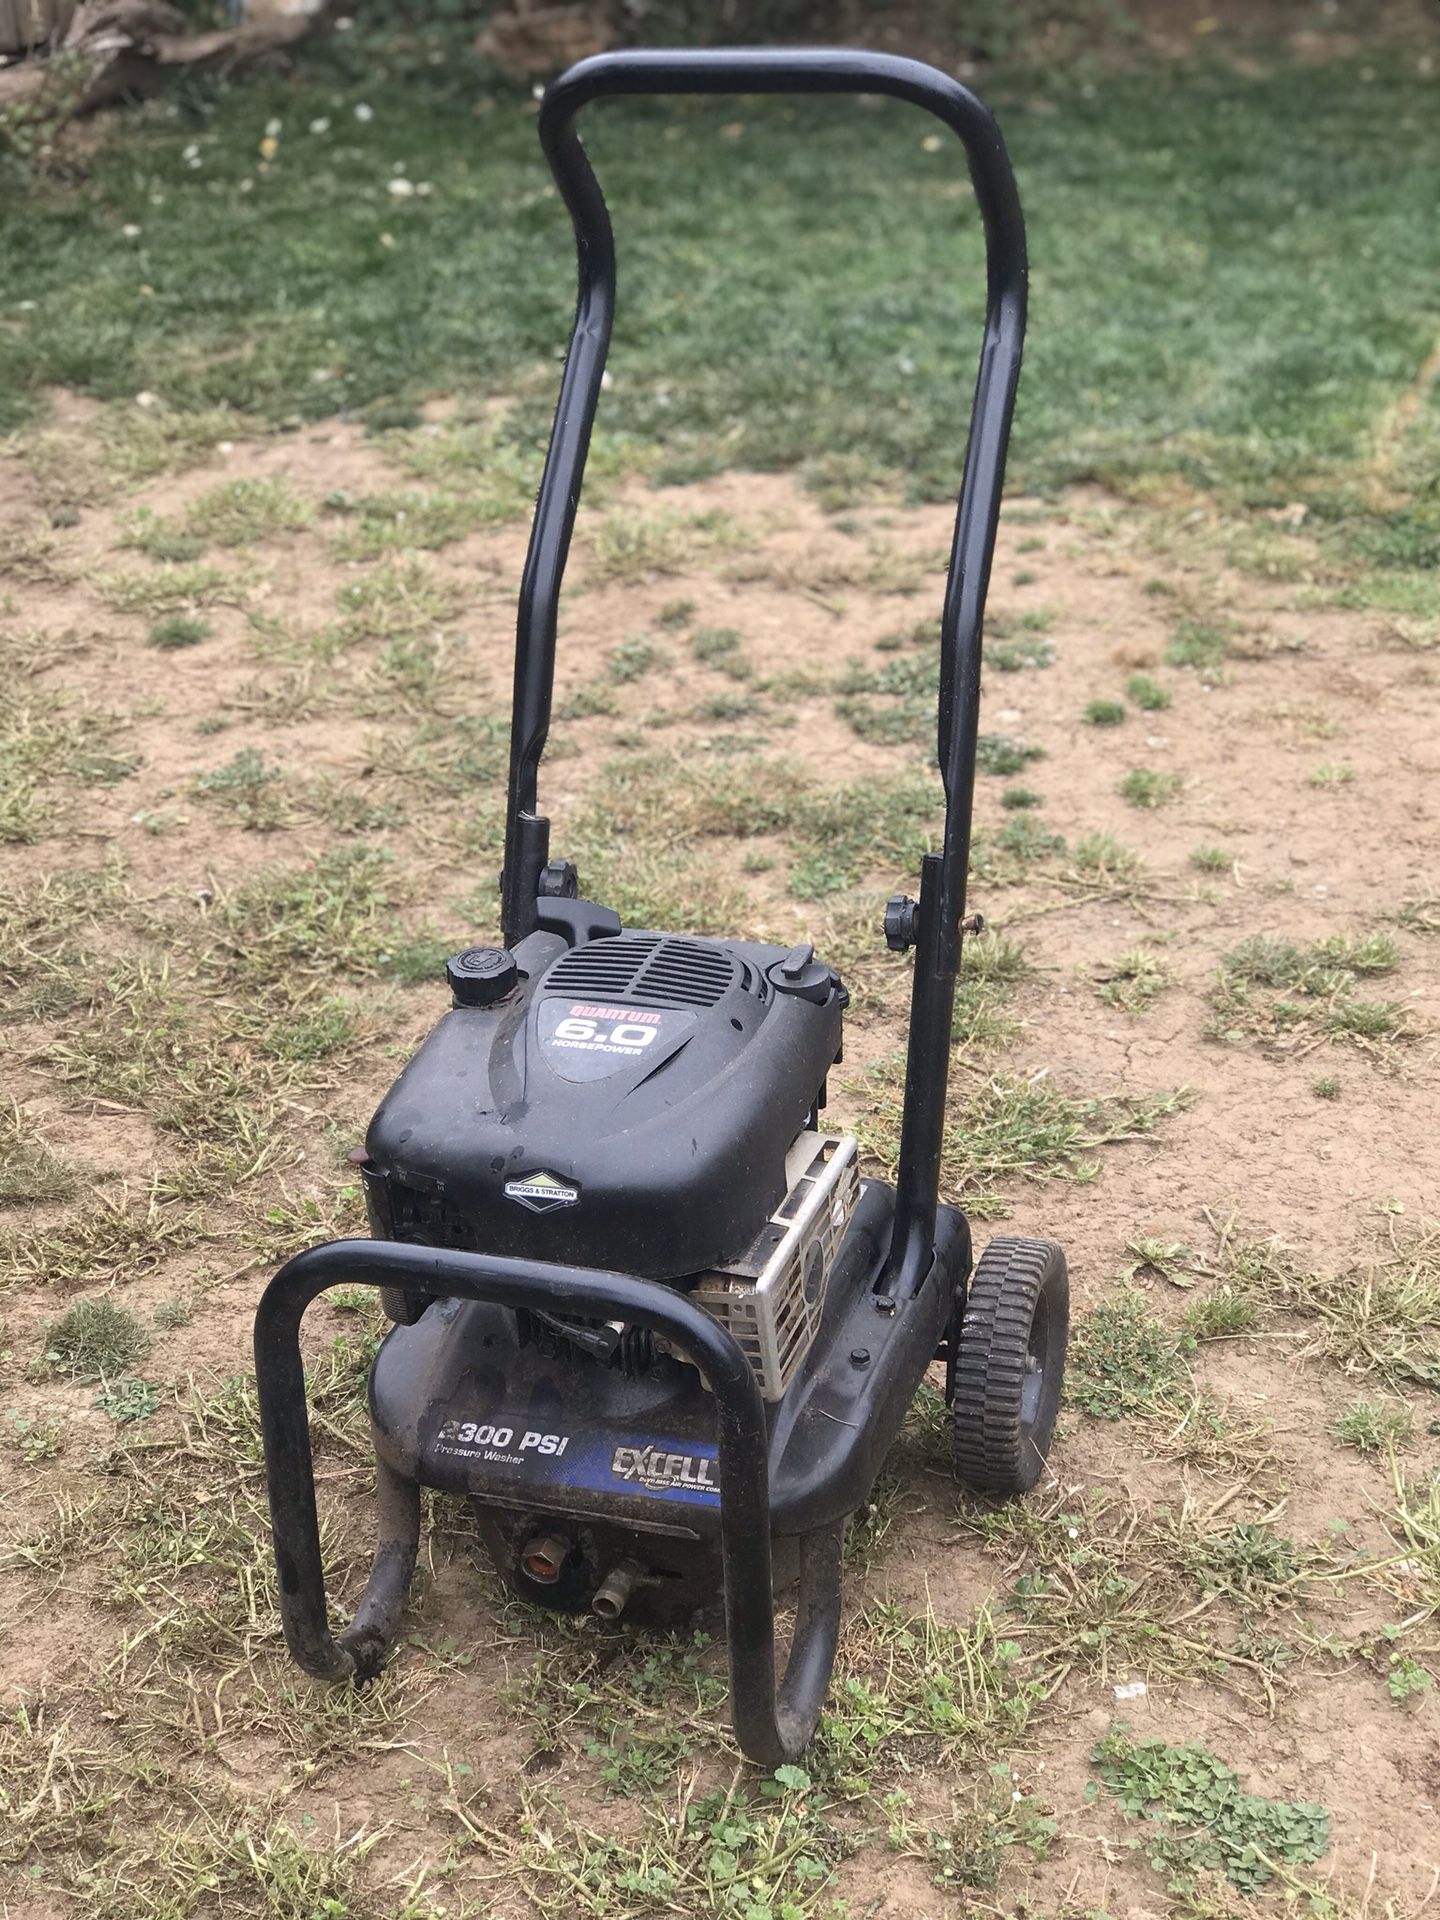 2300 psi Excell Gas Pressure Washer